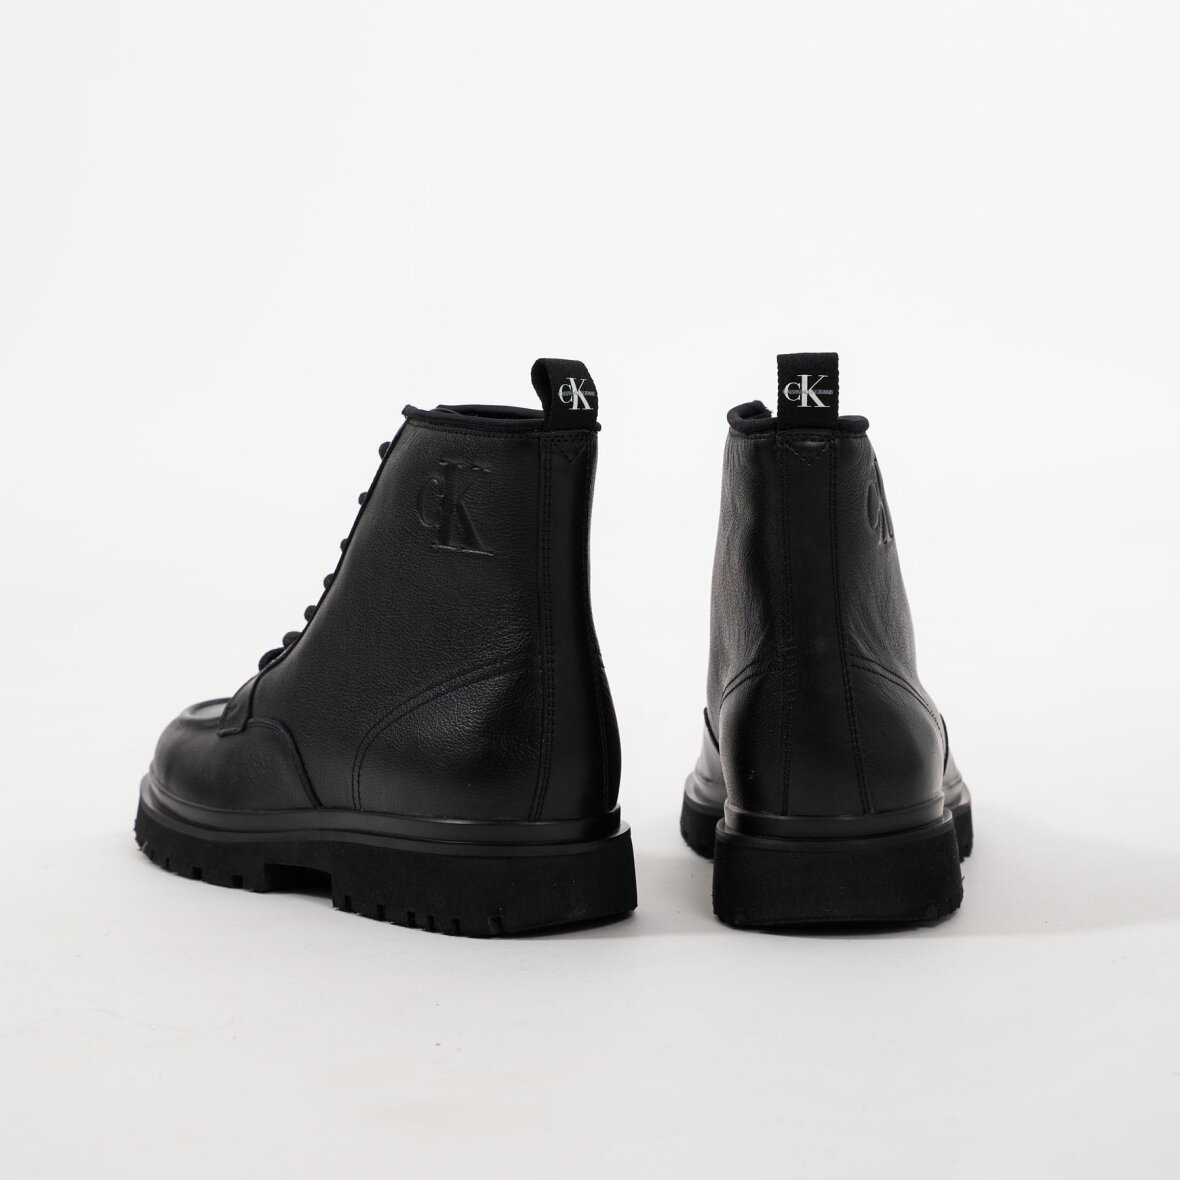 Calvin Klein Shoes - Lug mid laceup boot